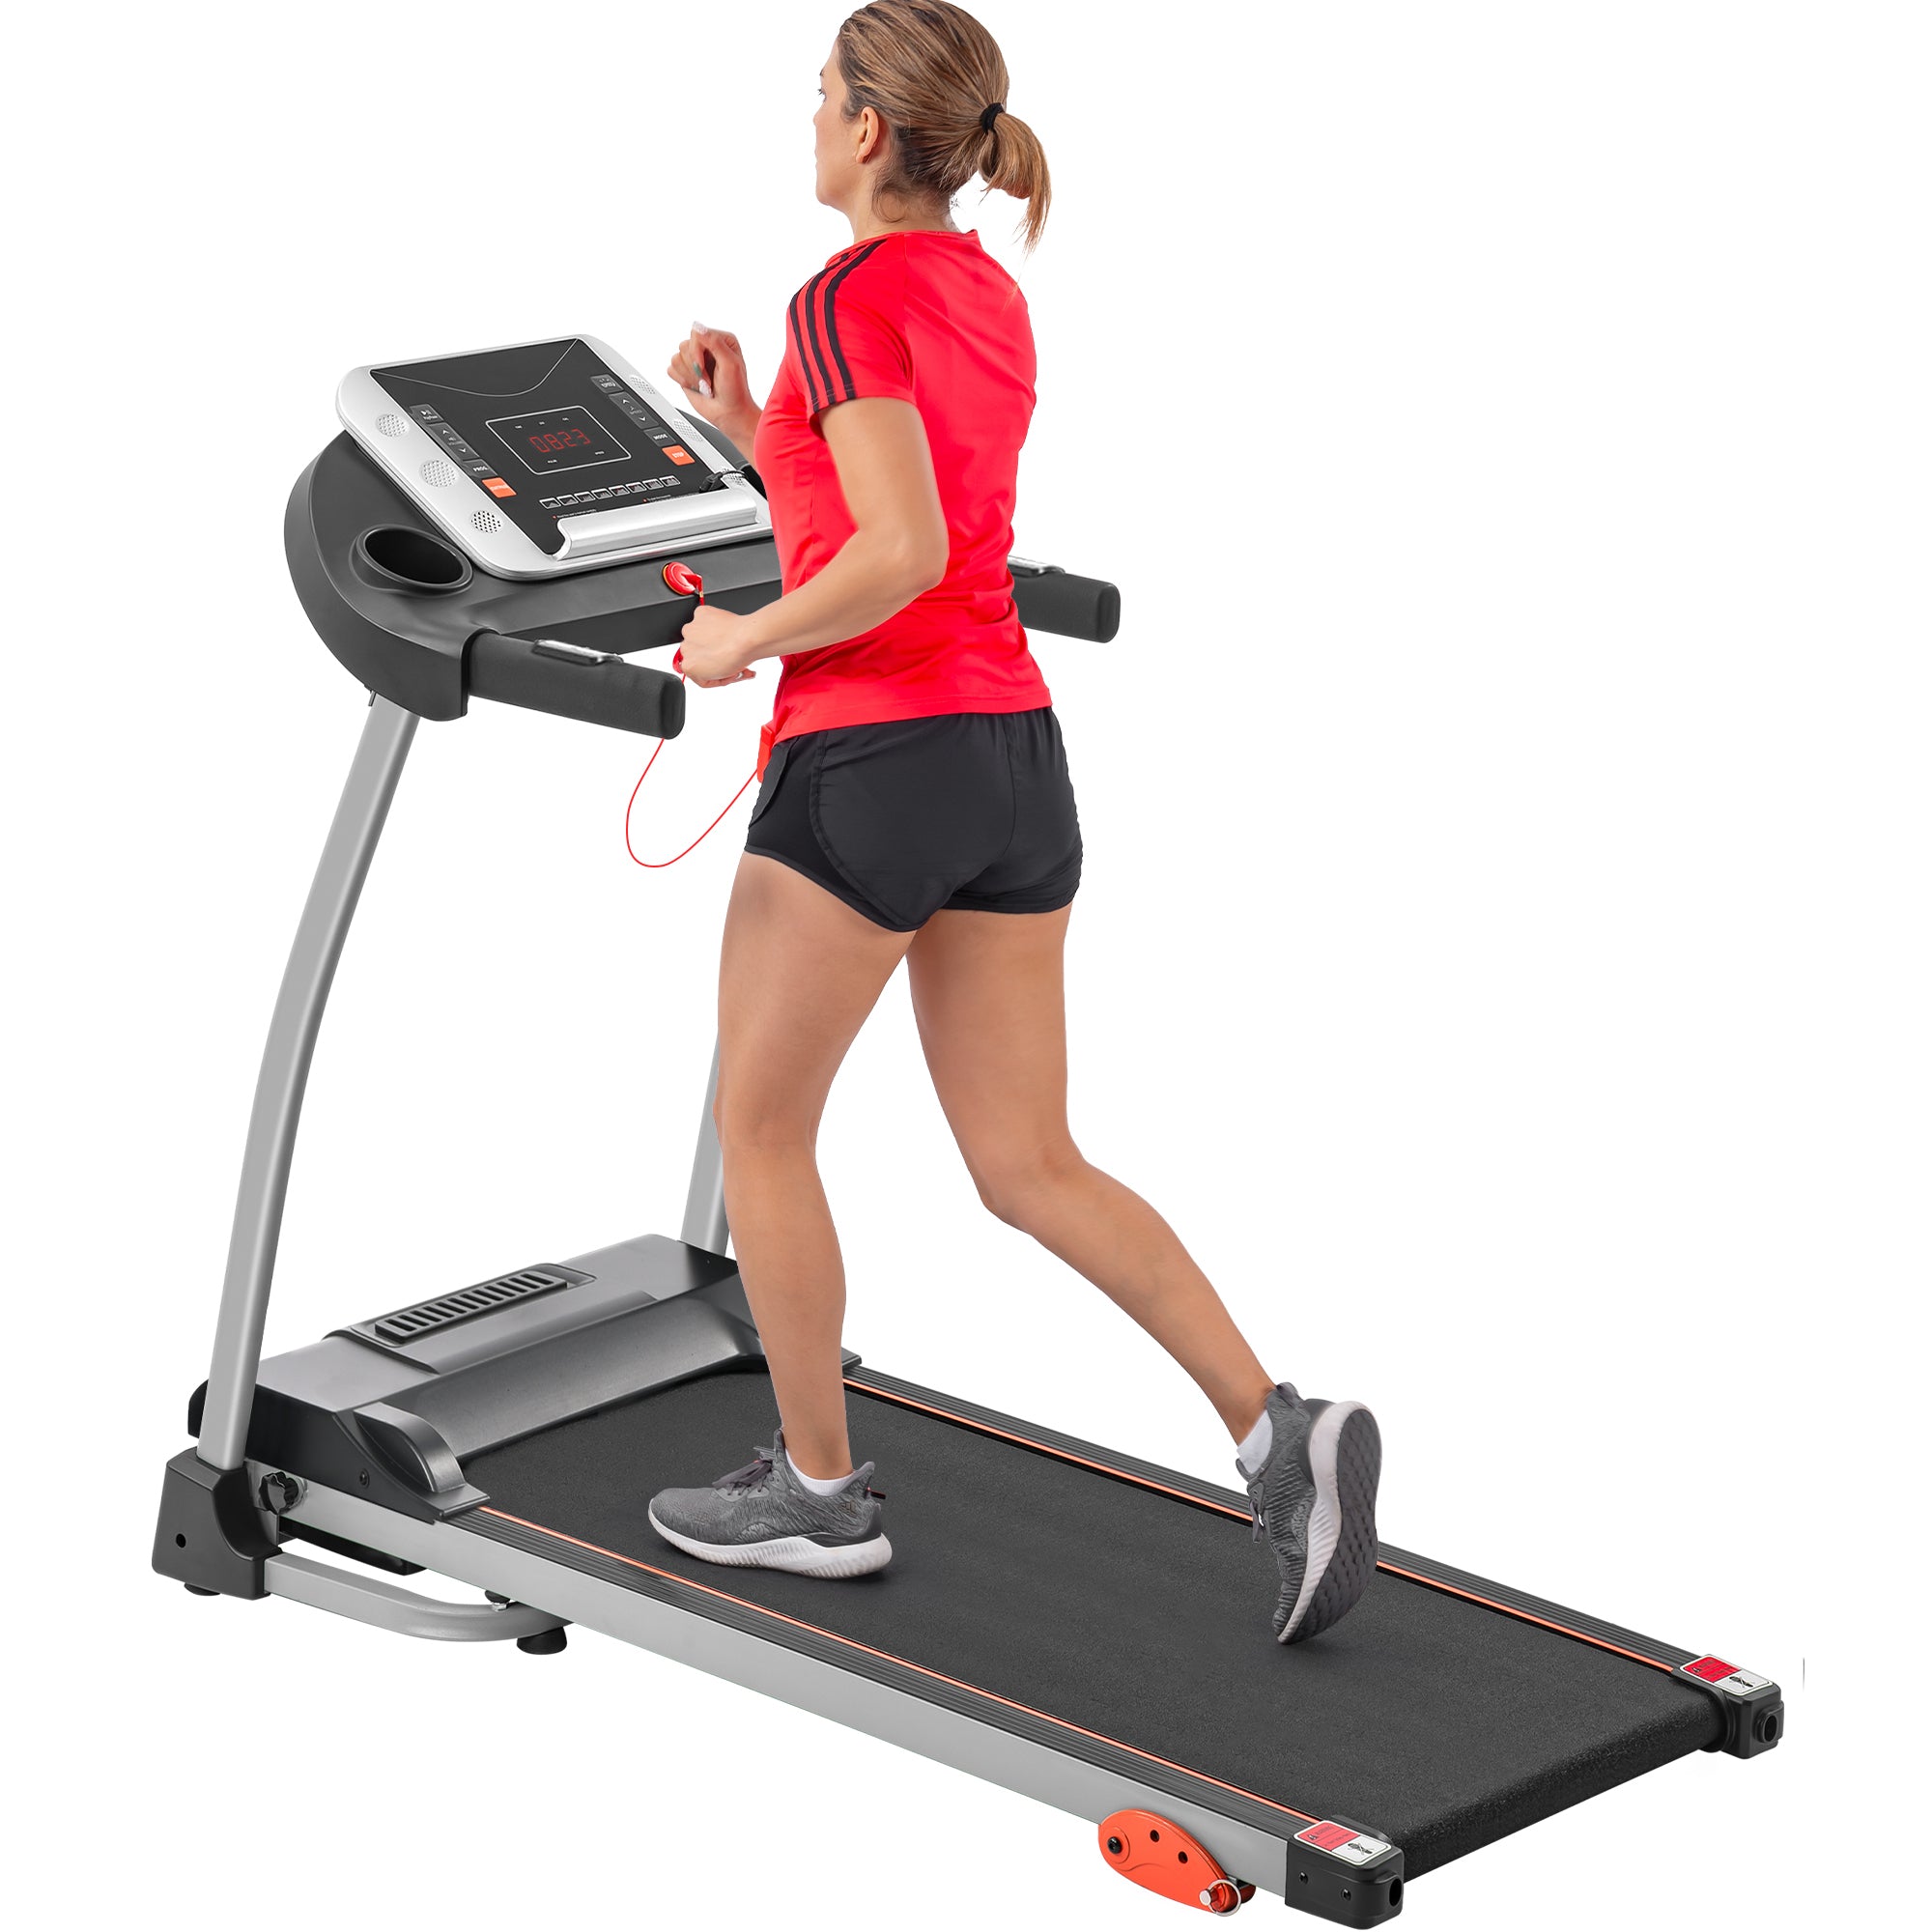 Easy Folding Treadmill for Home Use, 2.5HP Electric Running, Jogging & Walking Machine with Device Holder & Pulse Sensor, 3-Level Incline Adjustable Compact Foldable